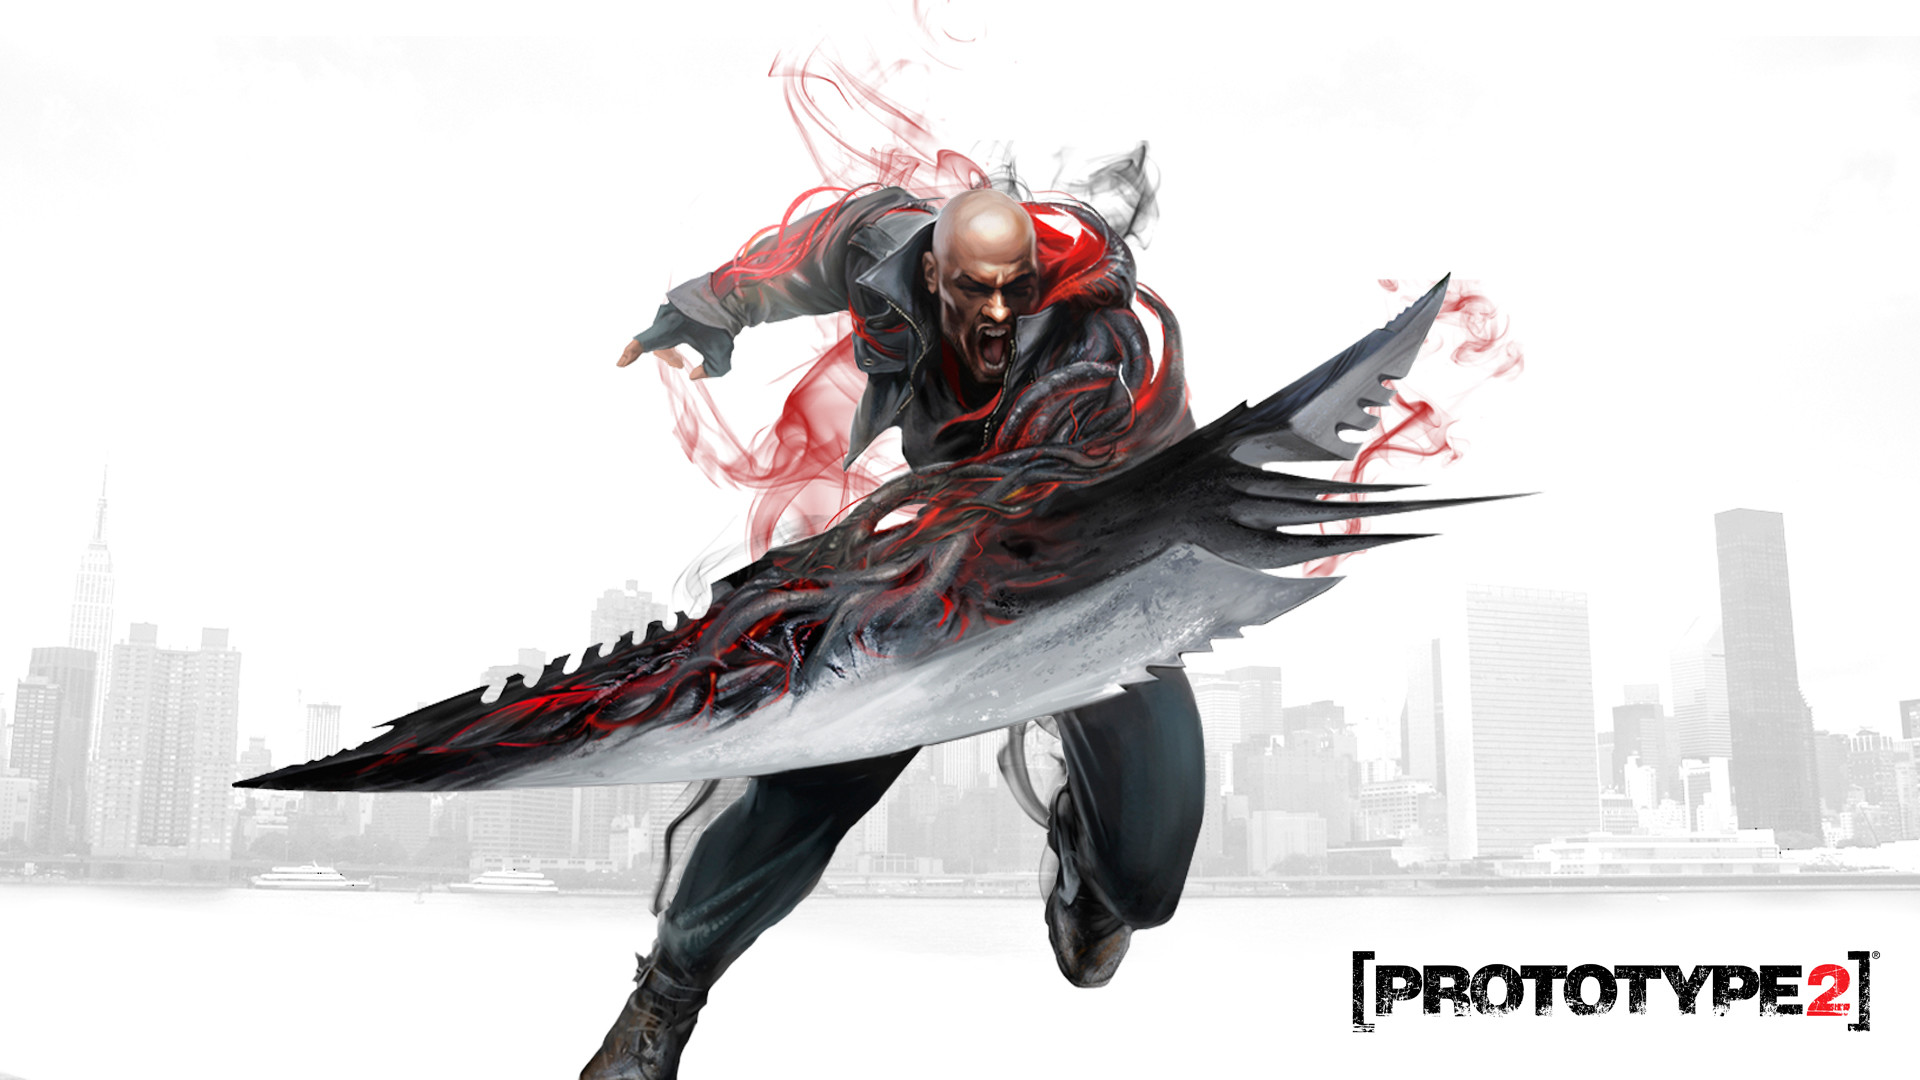 1920x1080 Prototype 2 Wallpaper by andyNroses Prototype 2 Wallpaper by andyNroses